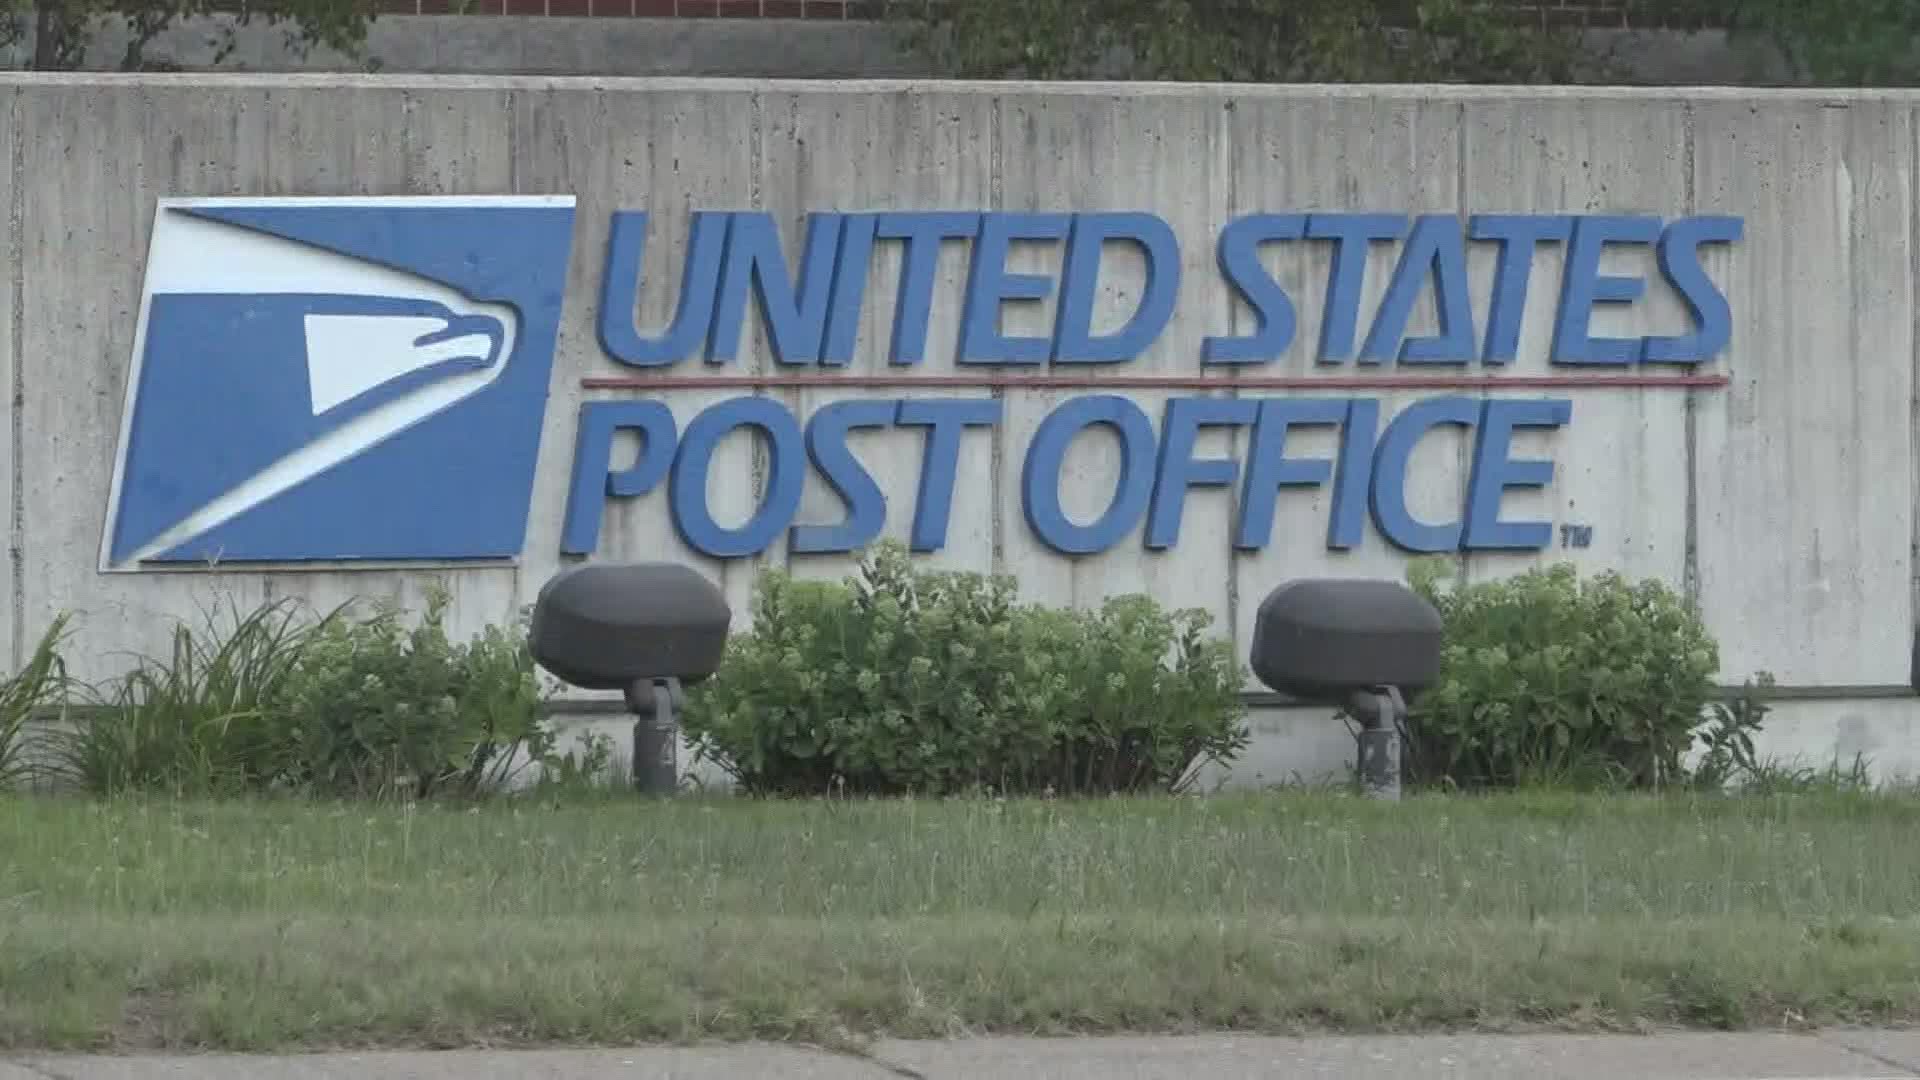 Senator Gary Peters is calling for an in-depth look at procedure changes within the United States Postal Service.